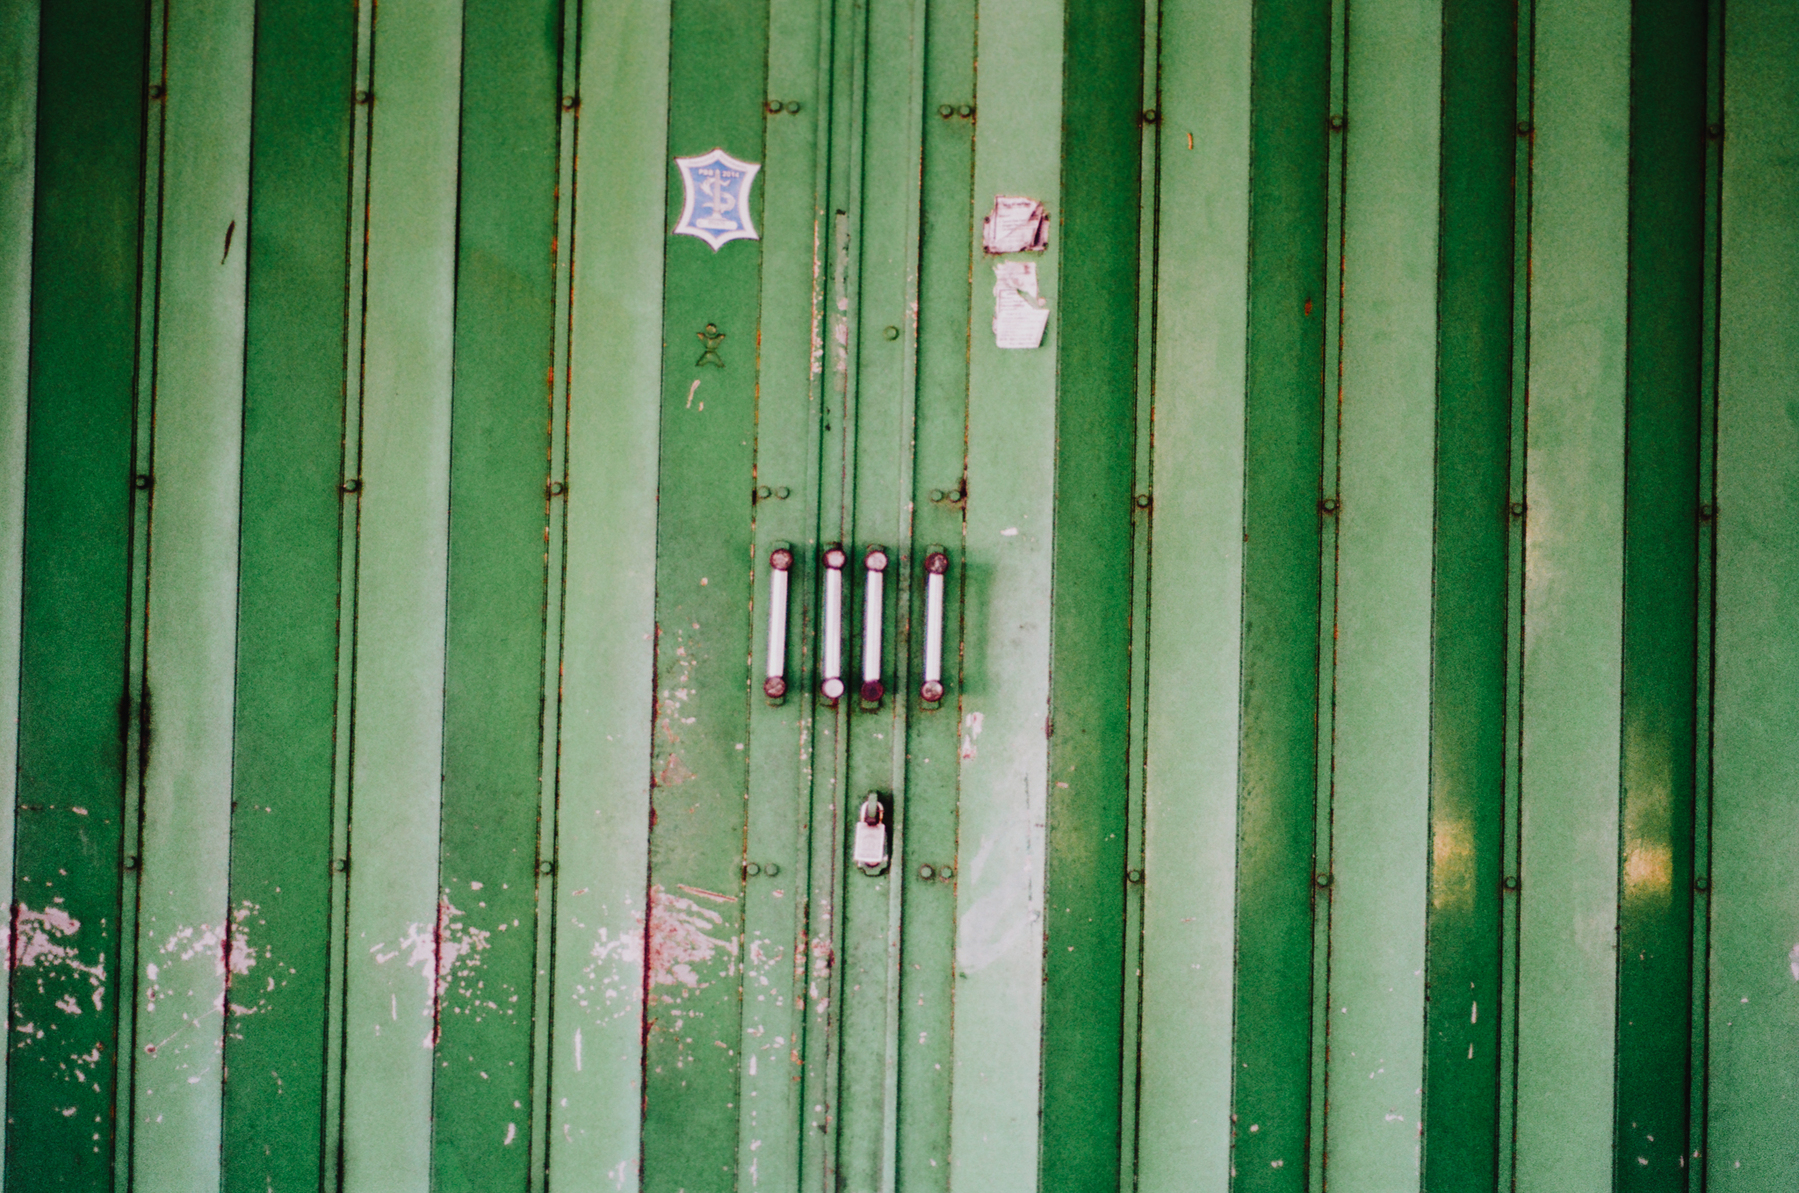 a scan of a color photo showing a large old green door with metal handles